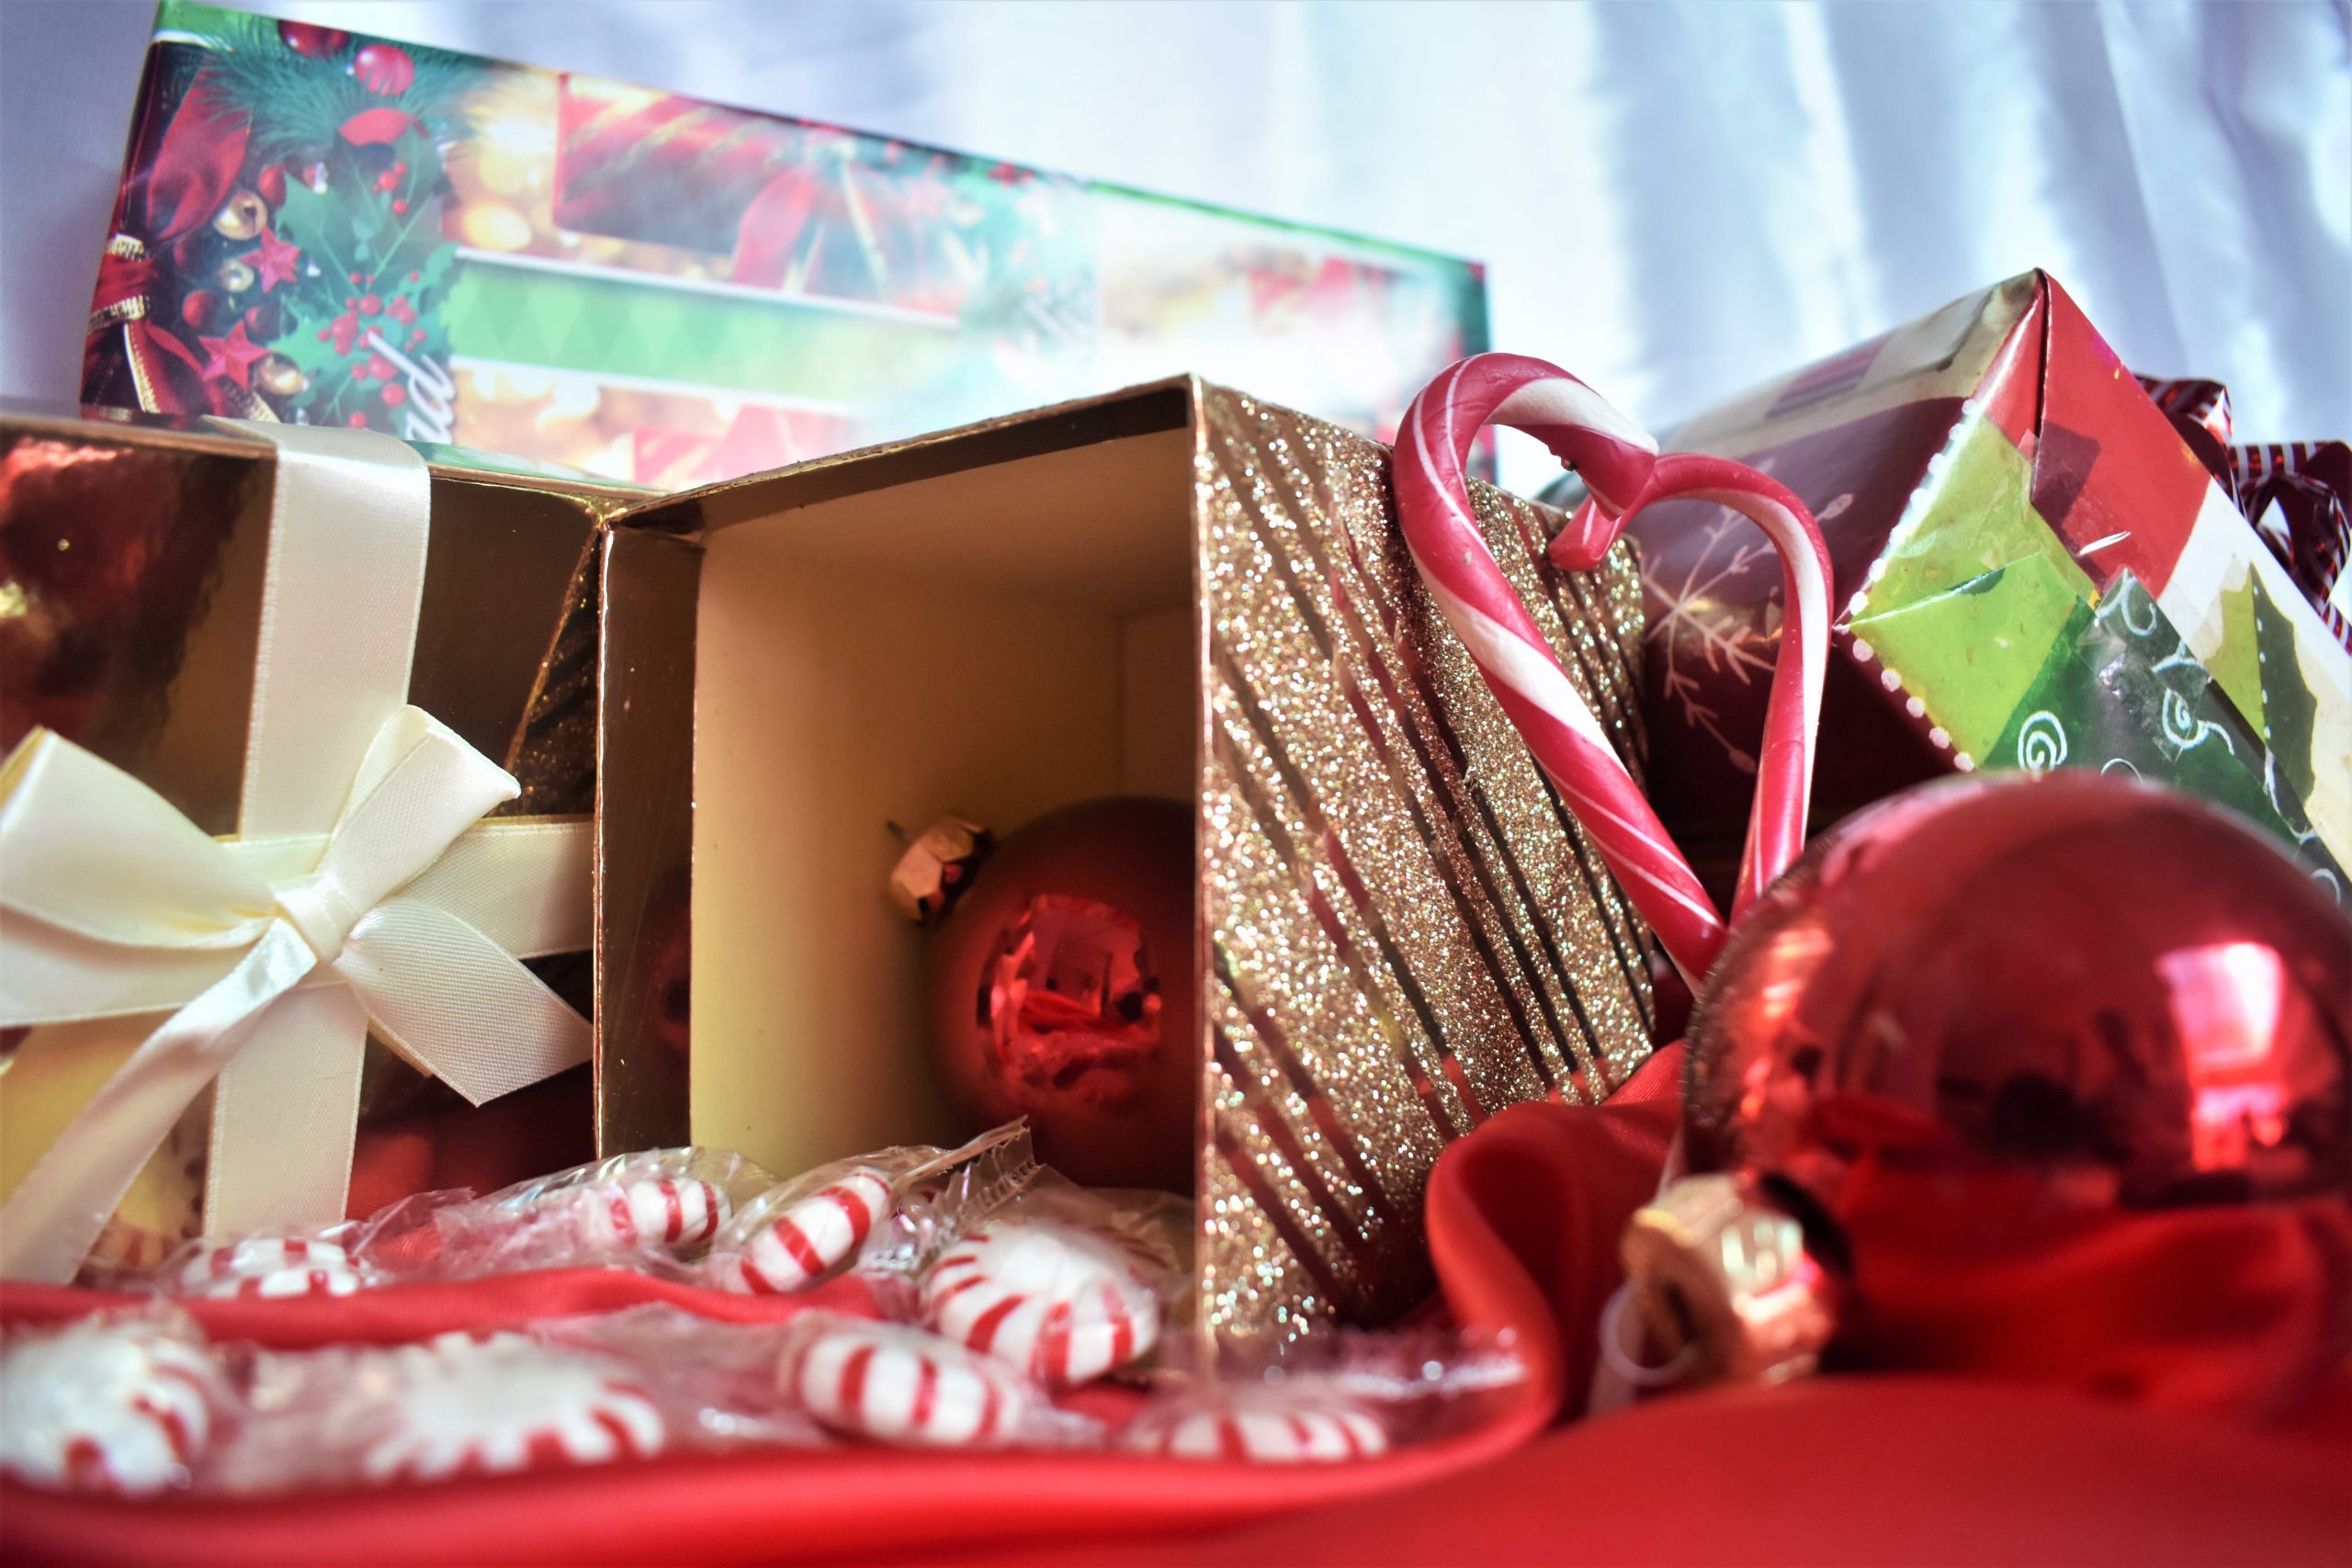 Open box with festive Christmas decorations and candies, holiday spirit.